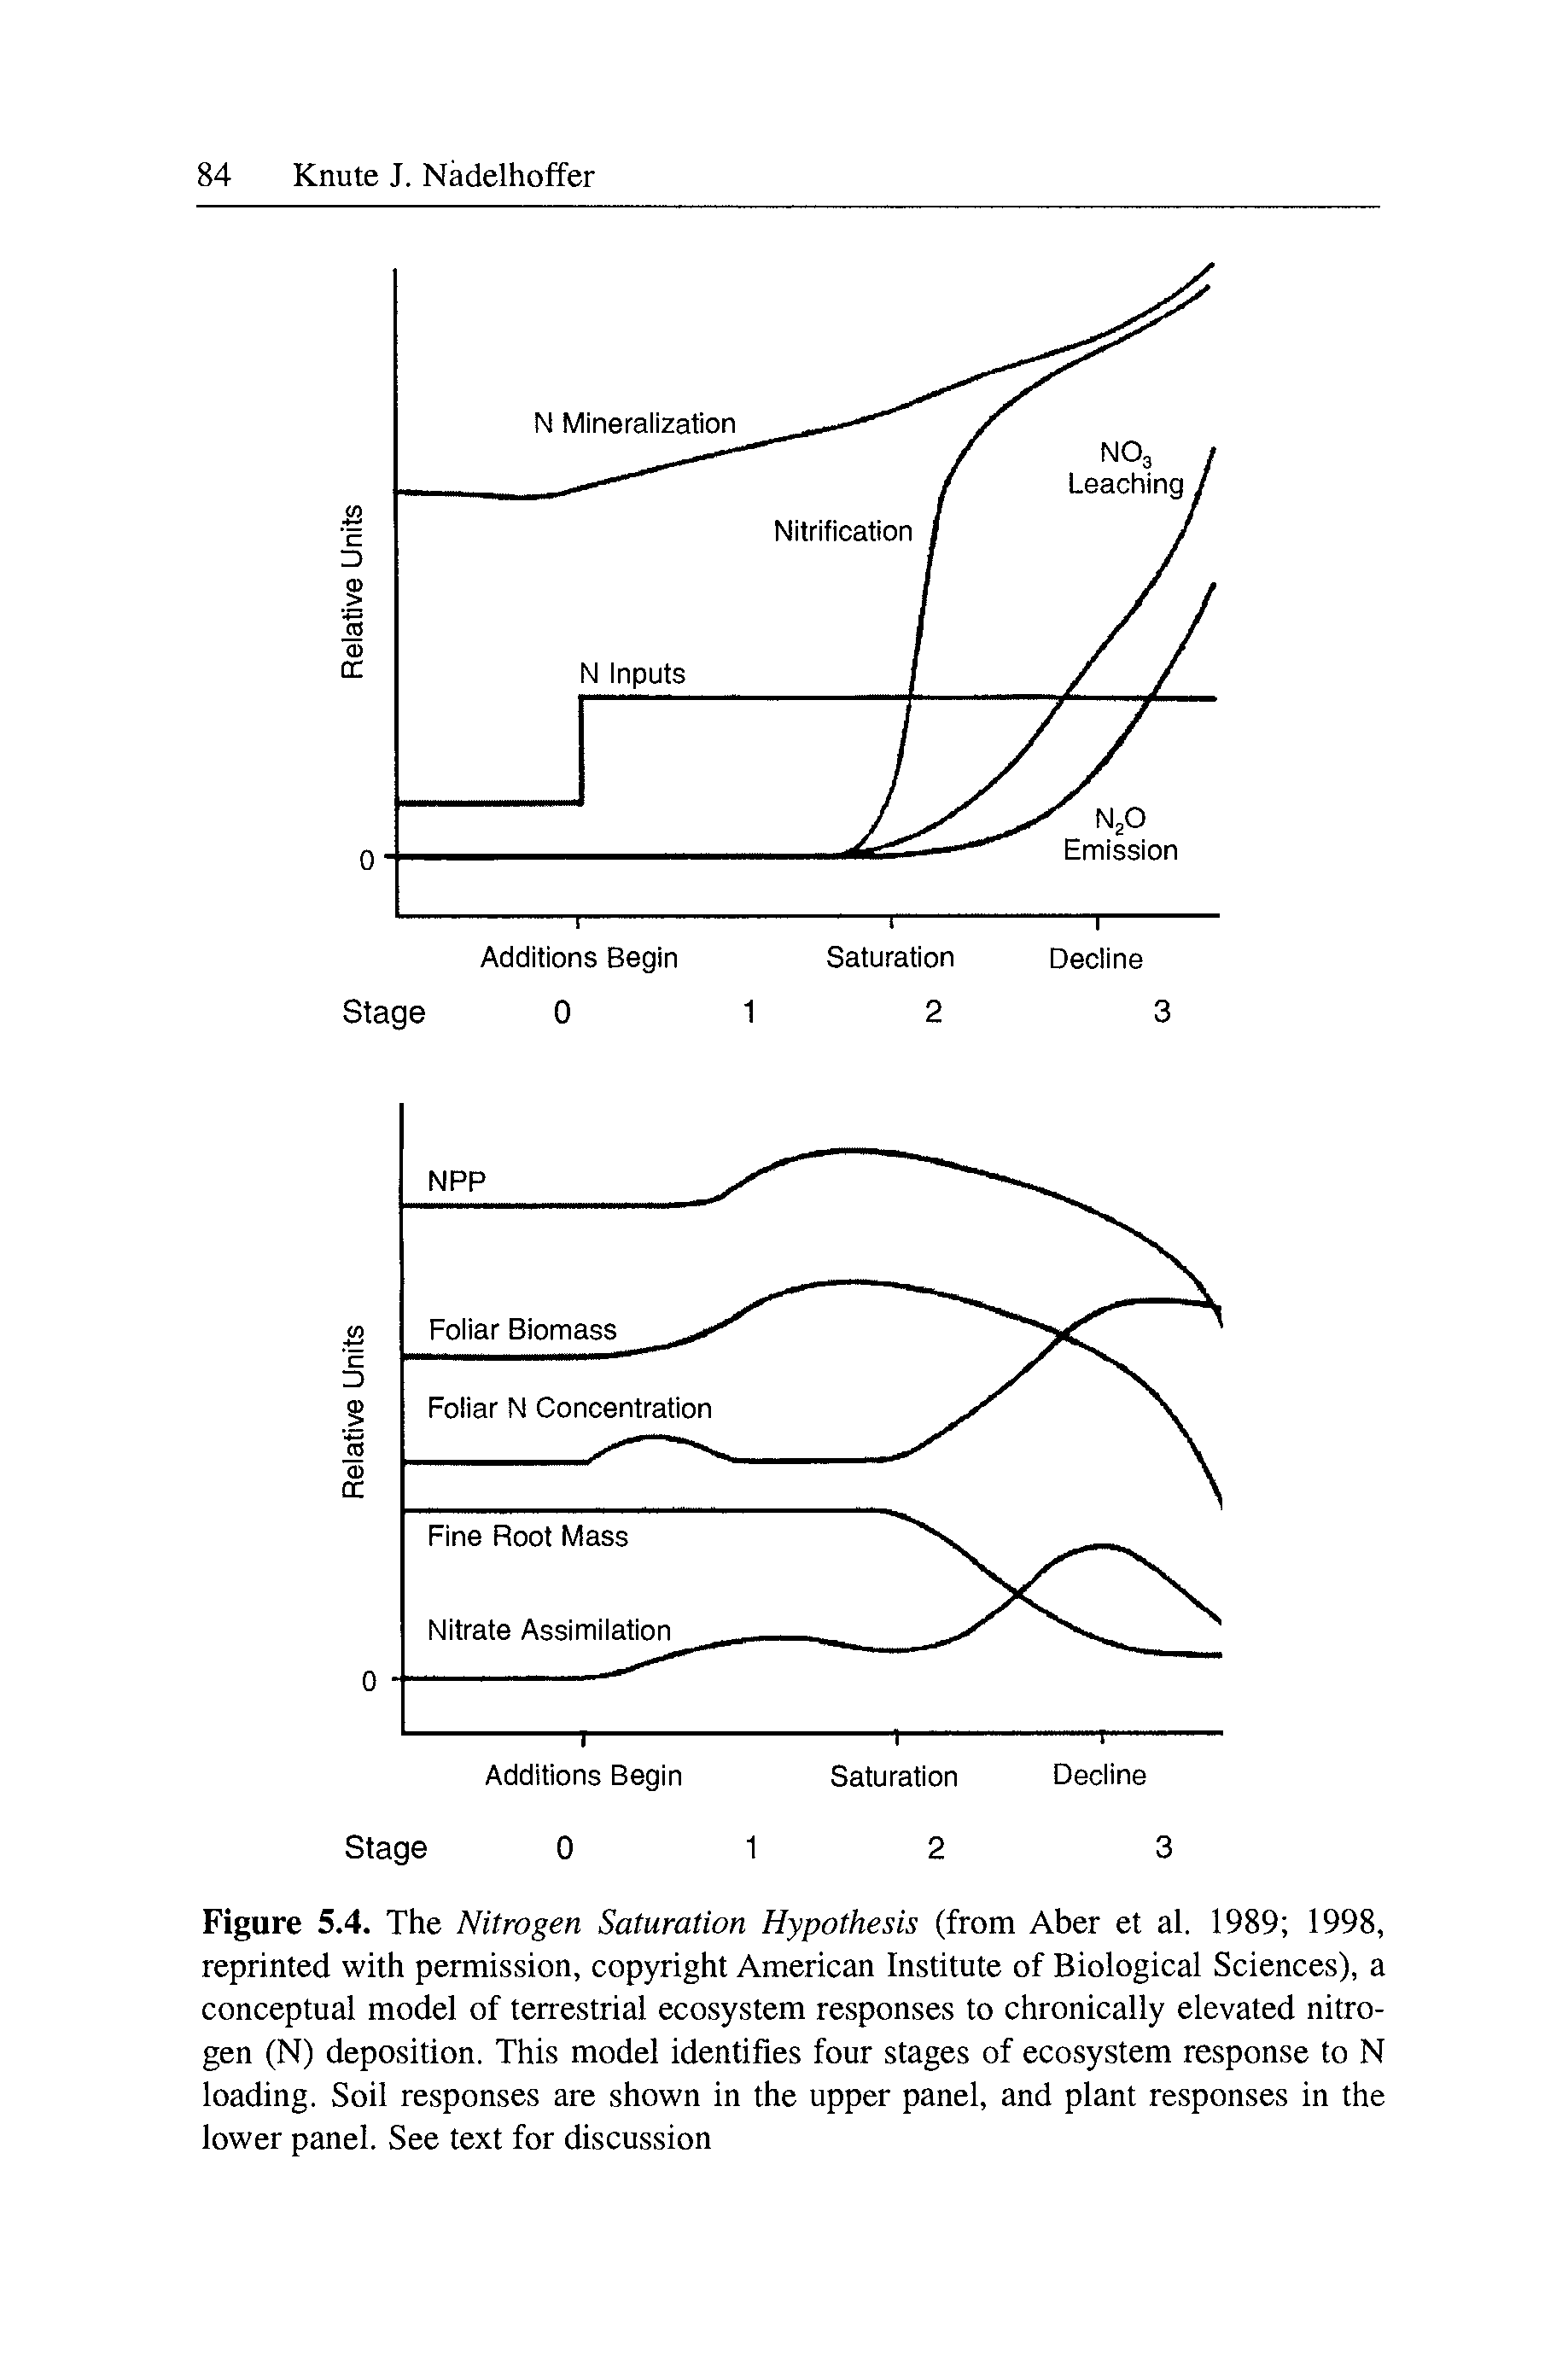 Figure 5.4. The Nitrogen Saturation Hypothesis (from Aber et al. 1989 1998, reprinted with permission, copyright American Institute of Biological Sciences), a conceptual model of terrestrial ecosystem responses to chronically elevated nitrogen (N) deposition. This model identifies four stages of ecosystem response to N loading. Soil responses are shown in the upper panel, and plant responses in the lower panel. See text for discussion...